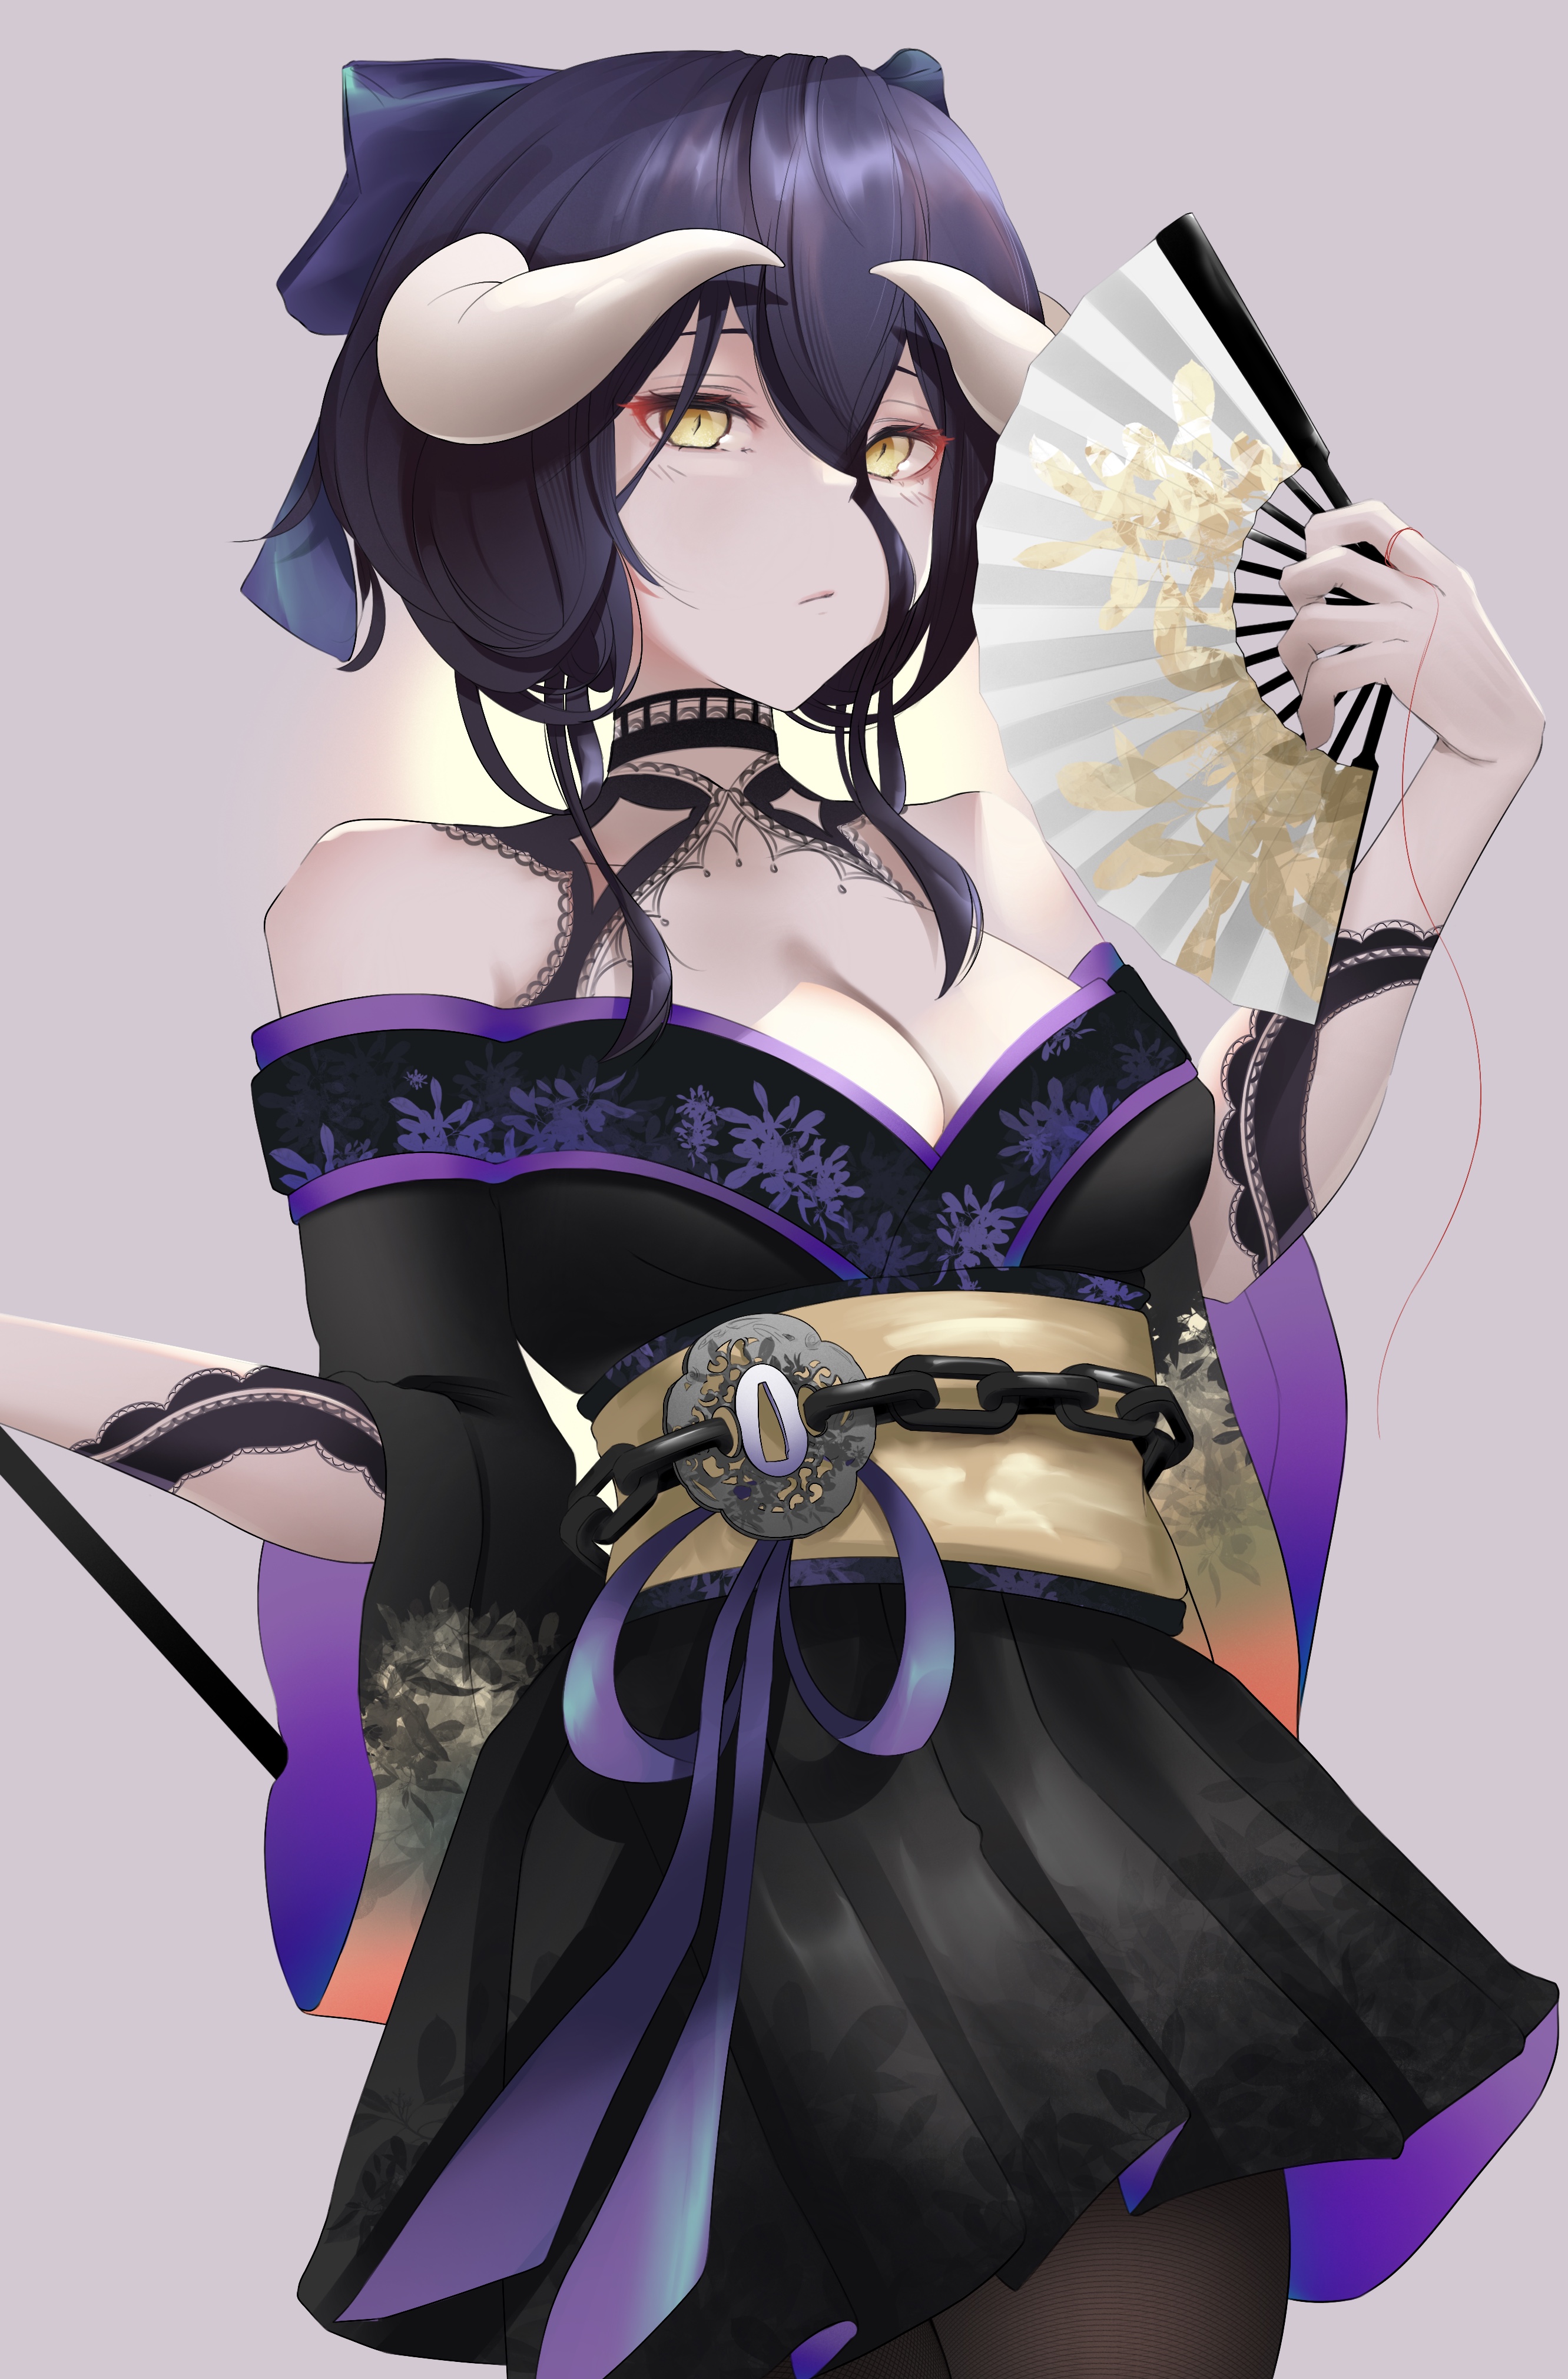 Anime Anime Girls Overlord Albedo OverLord Fans 2663x4040